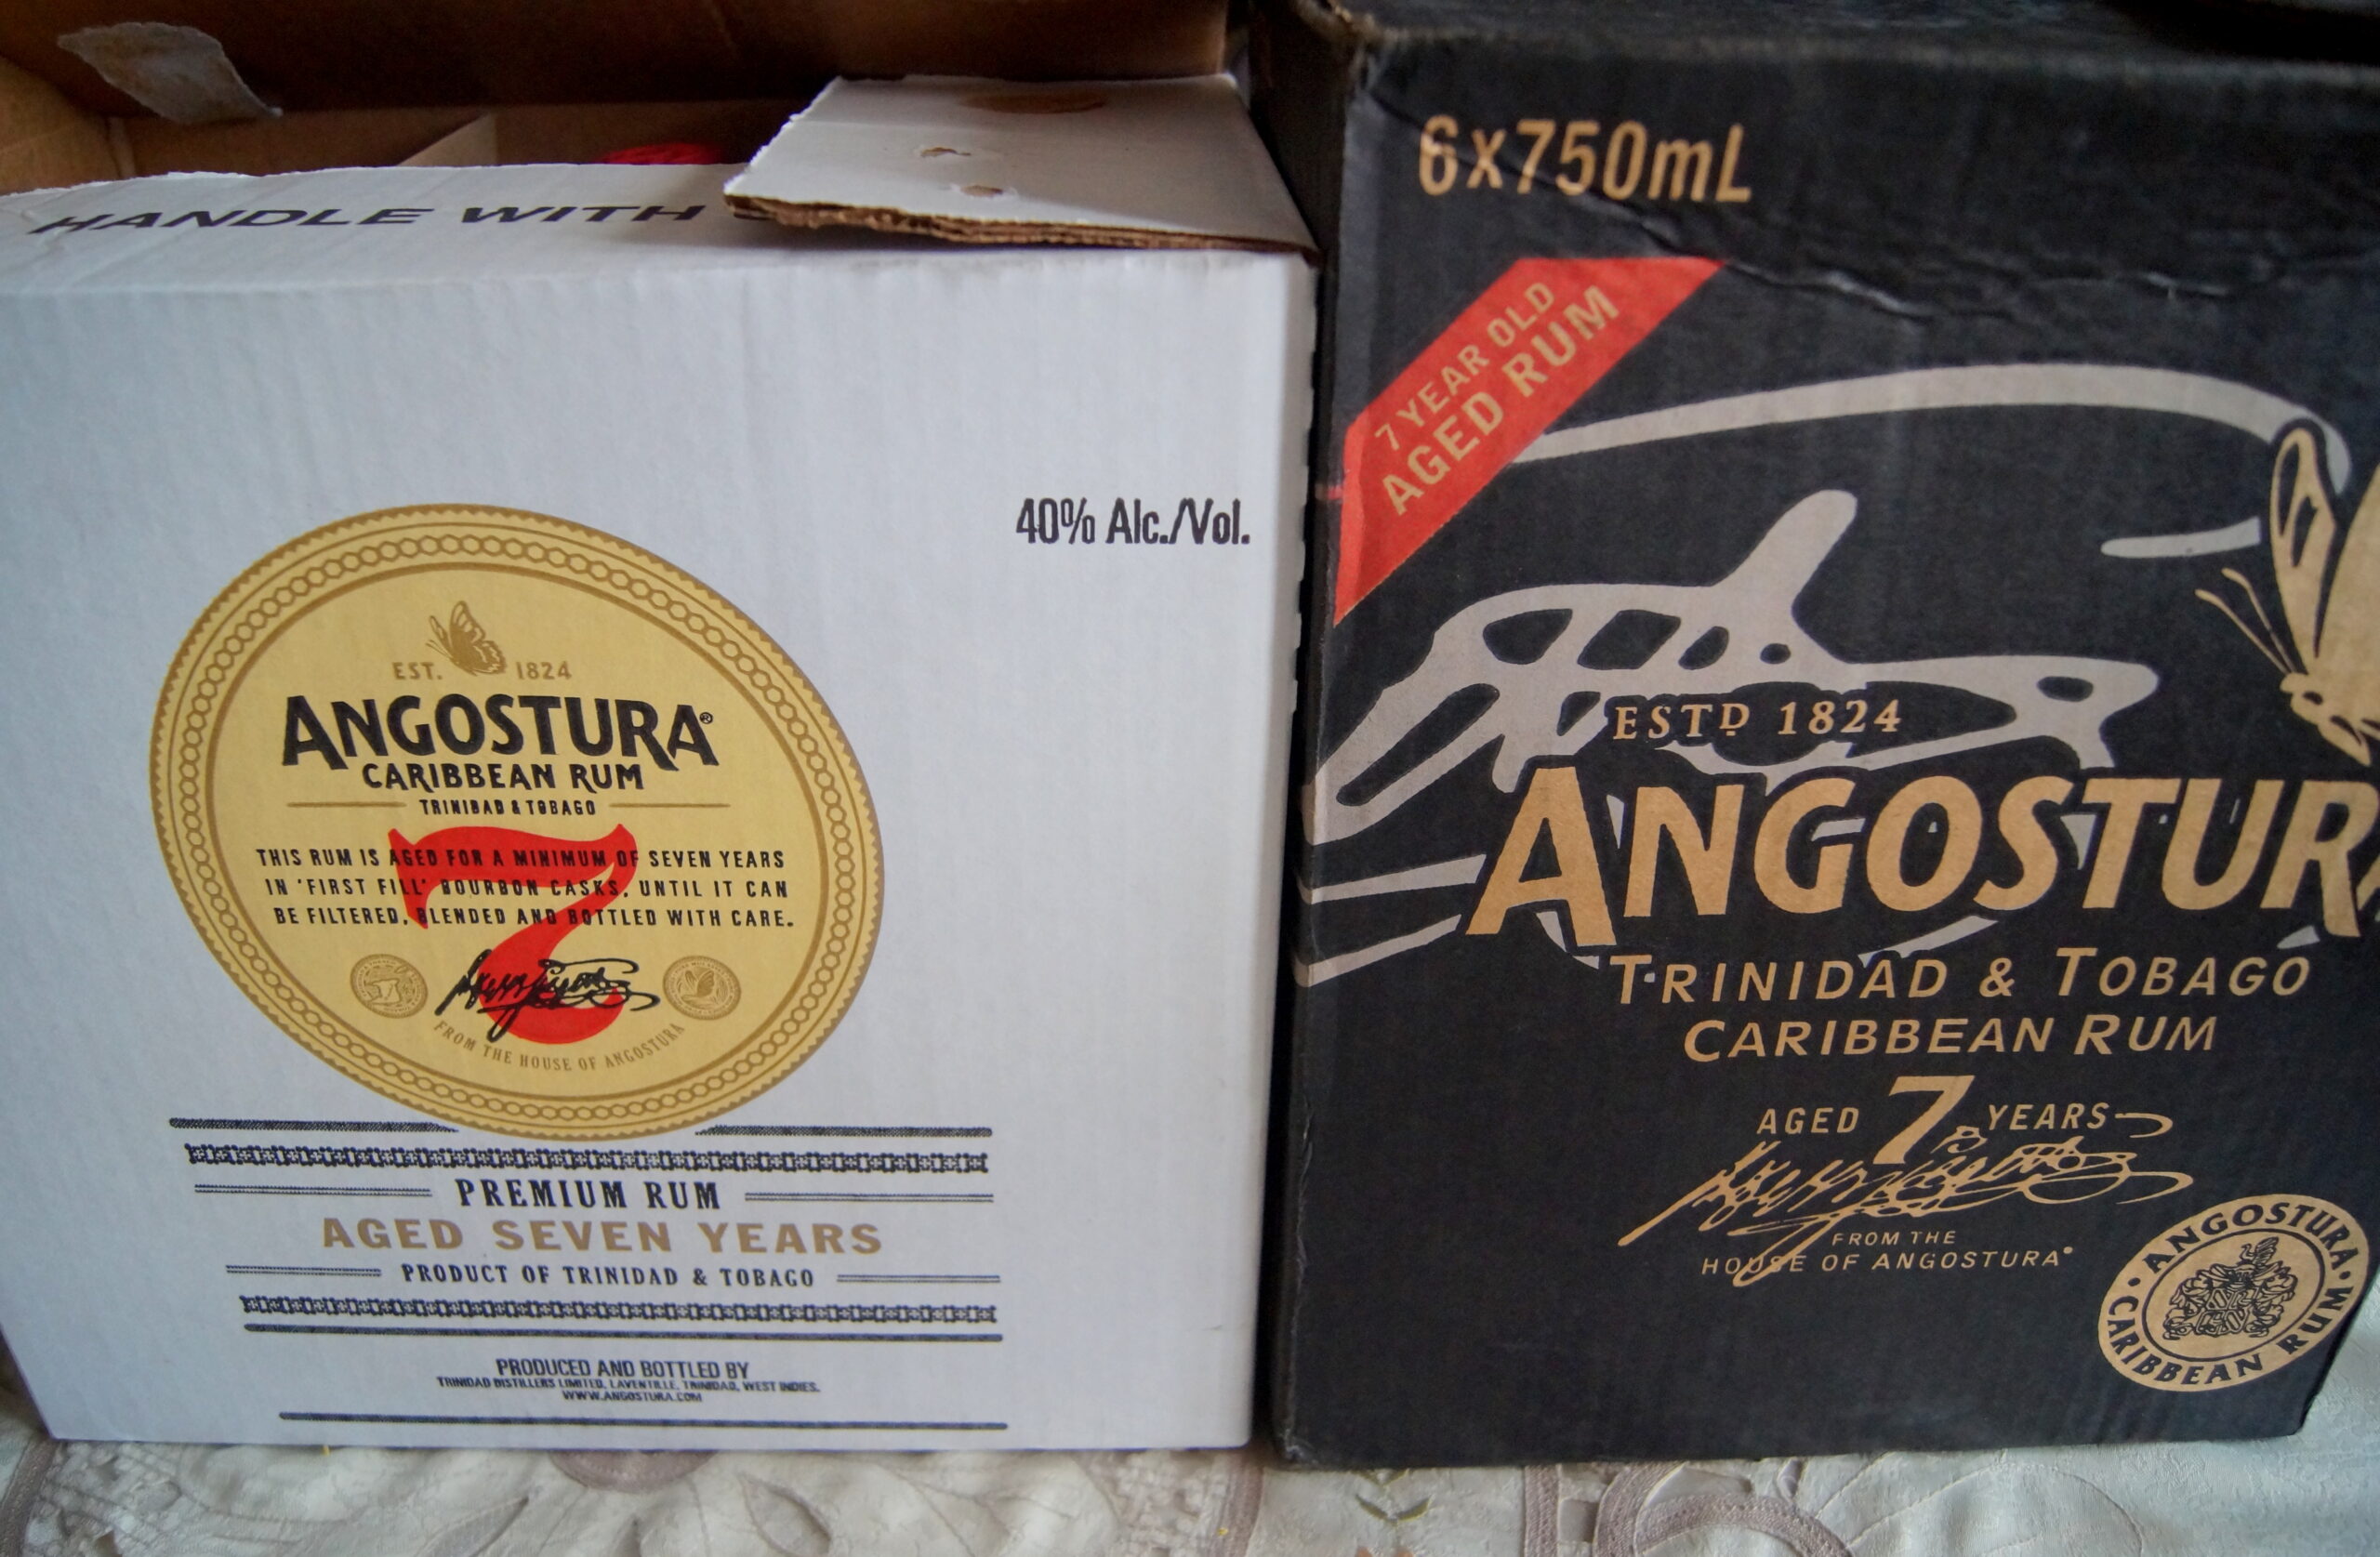 The new case and the older case for Angostura 7 Year Old Rum